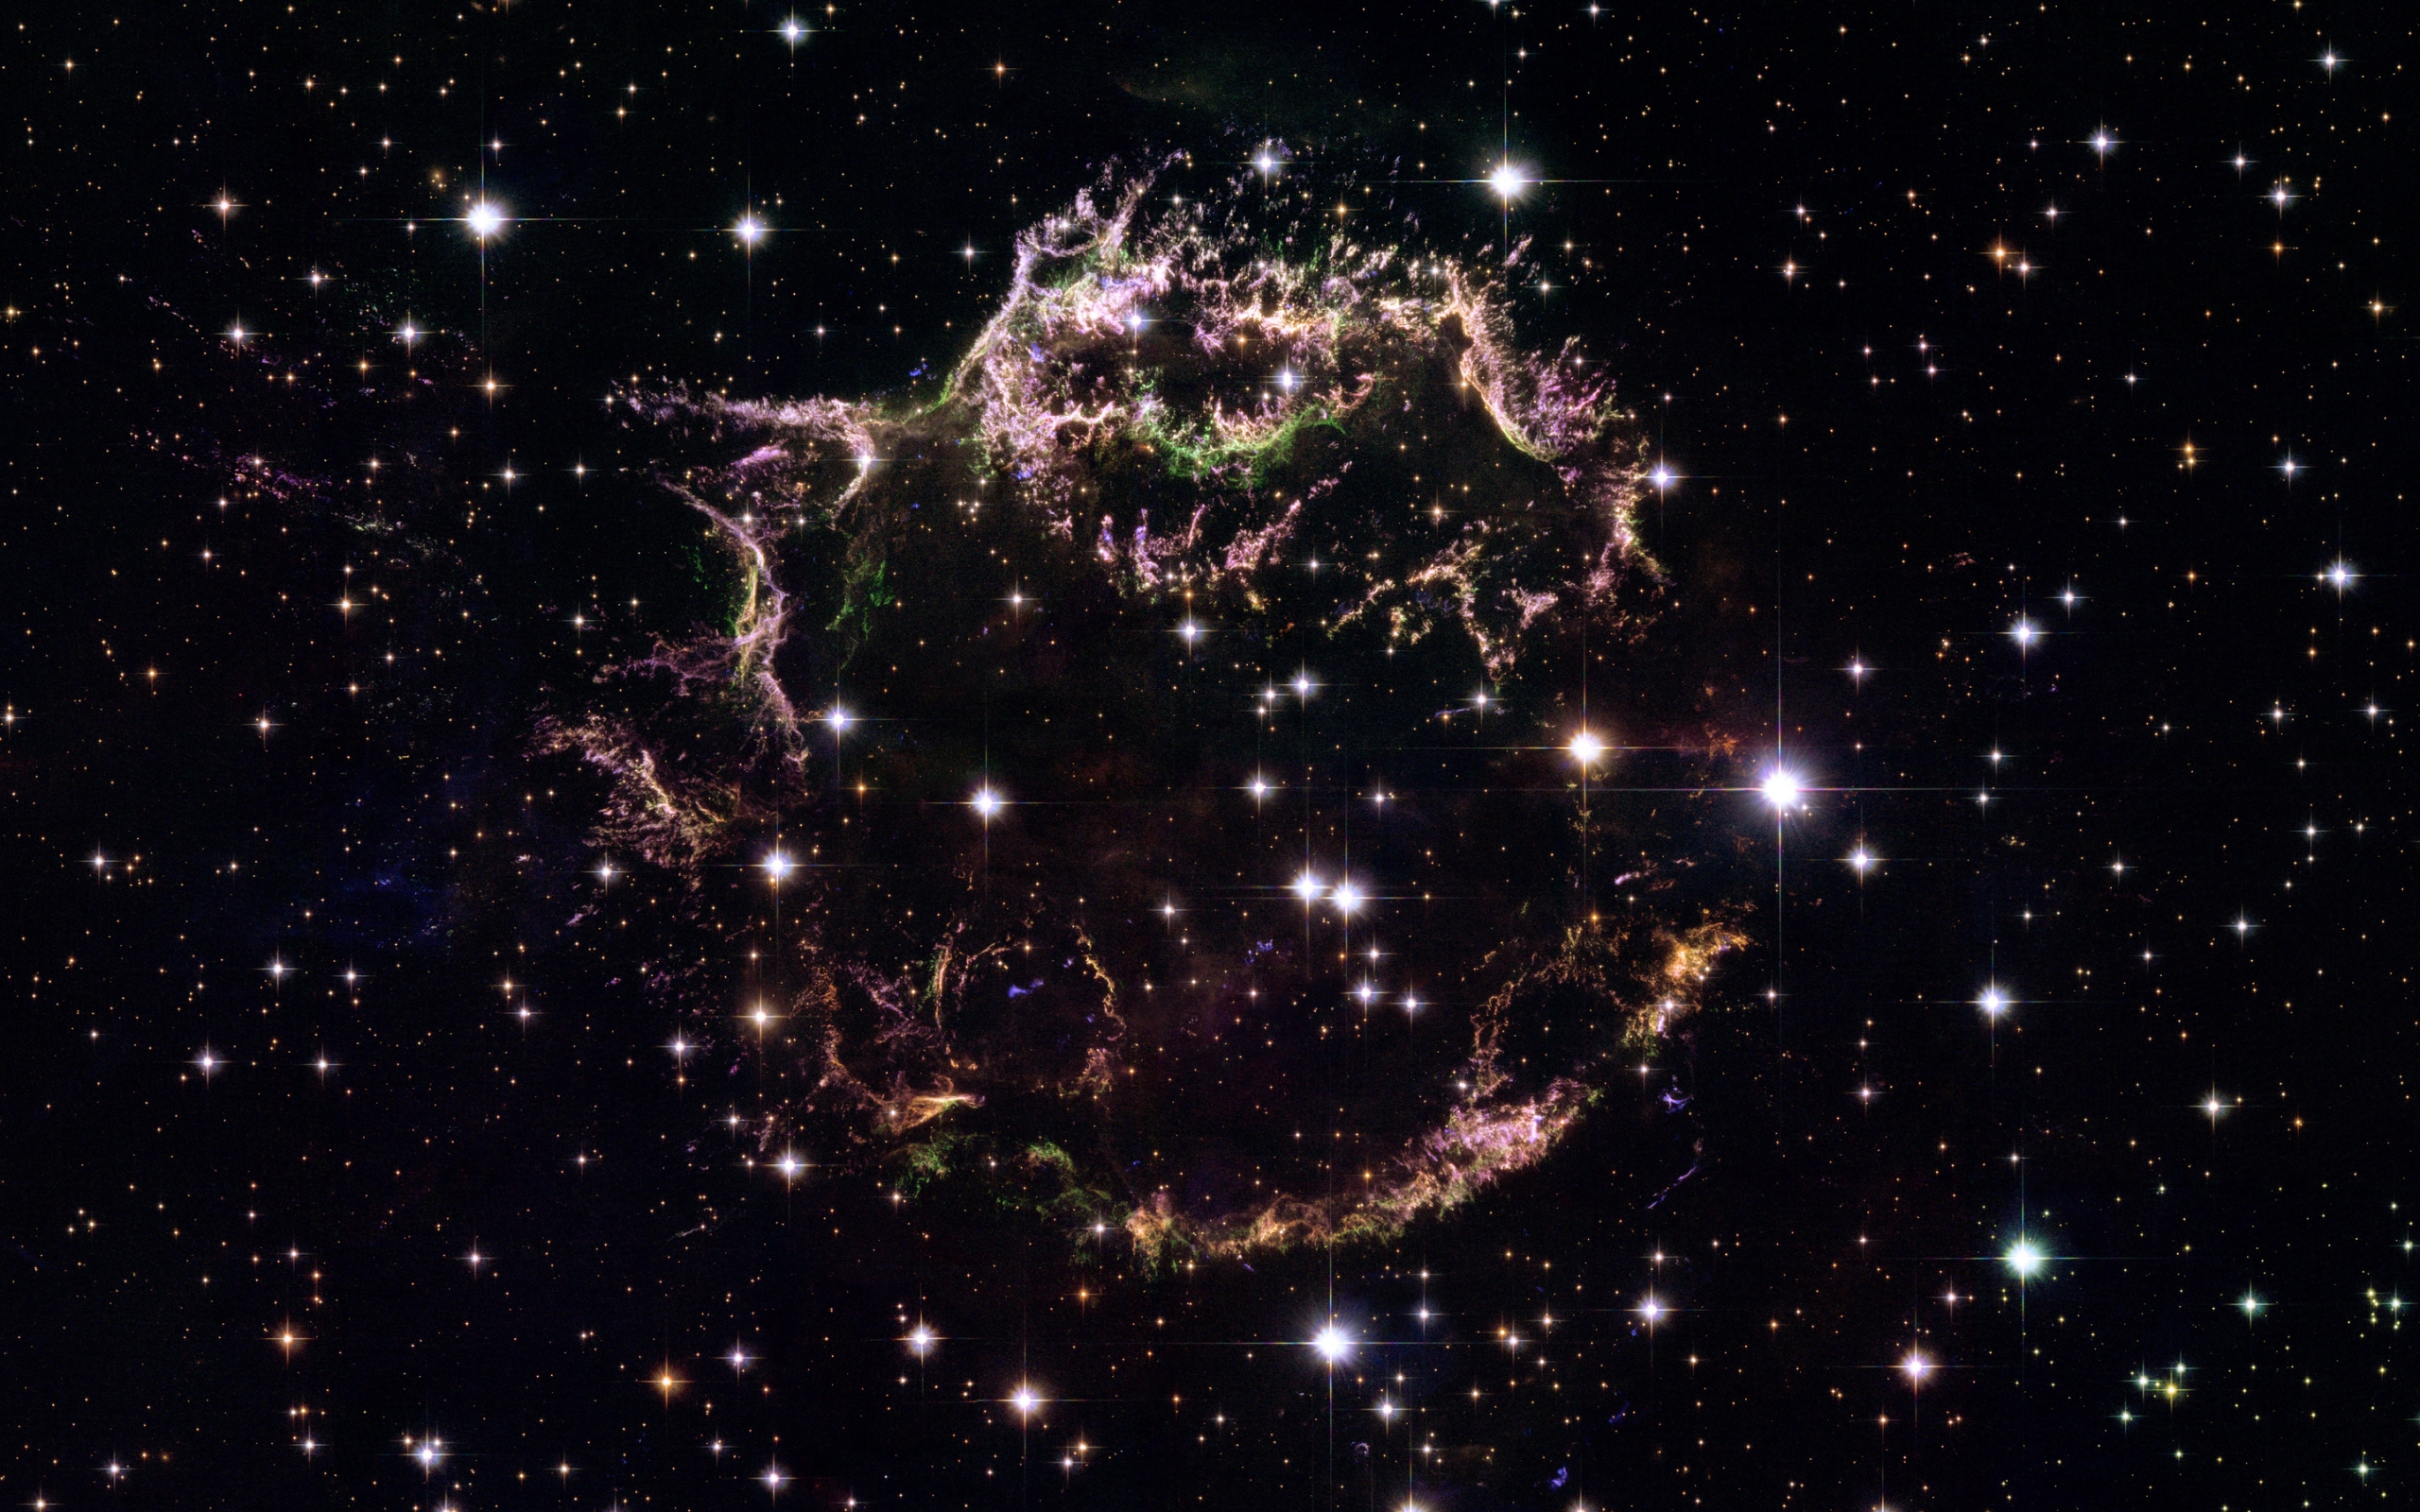 Cassiopeia for 2560 x 1600 widescreen resolution